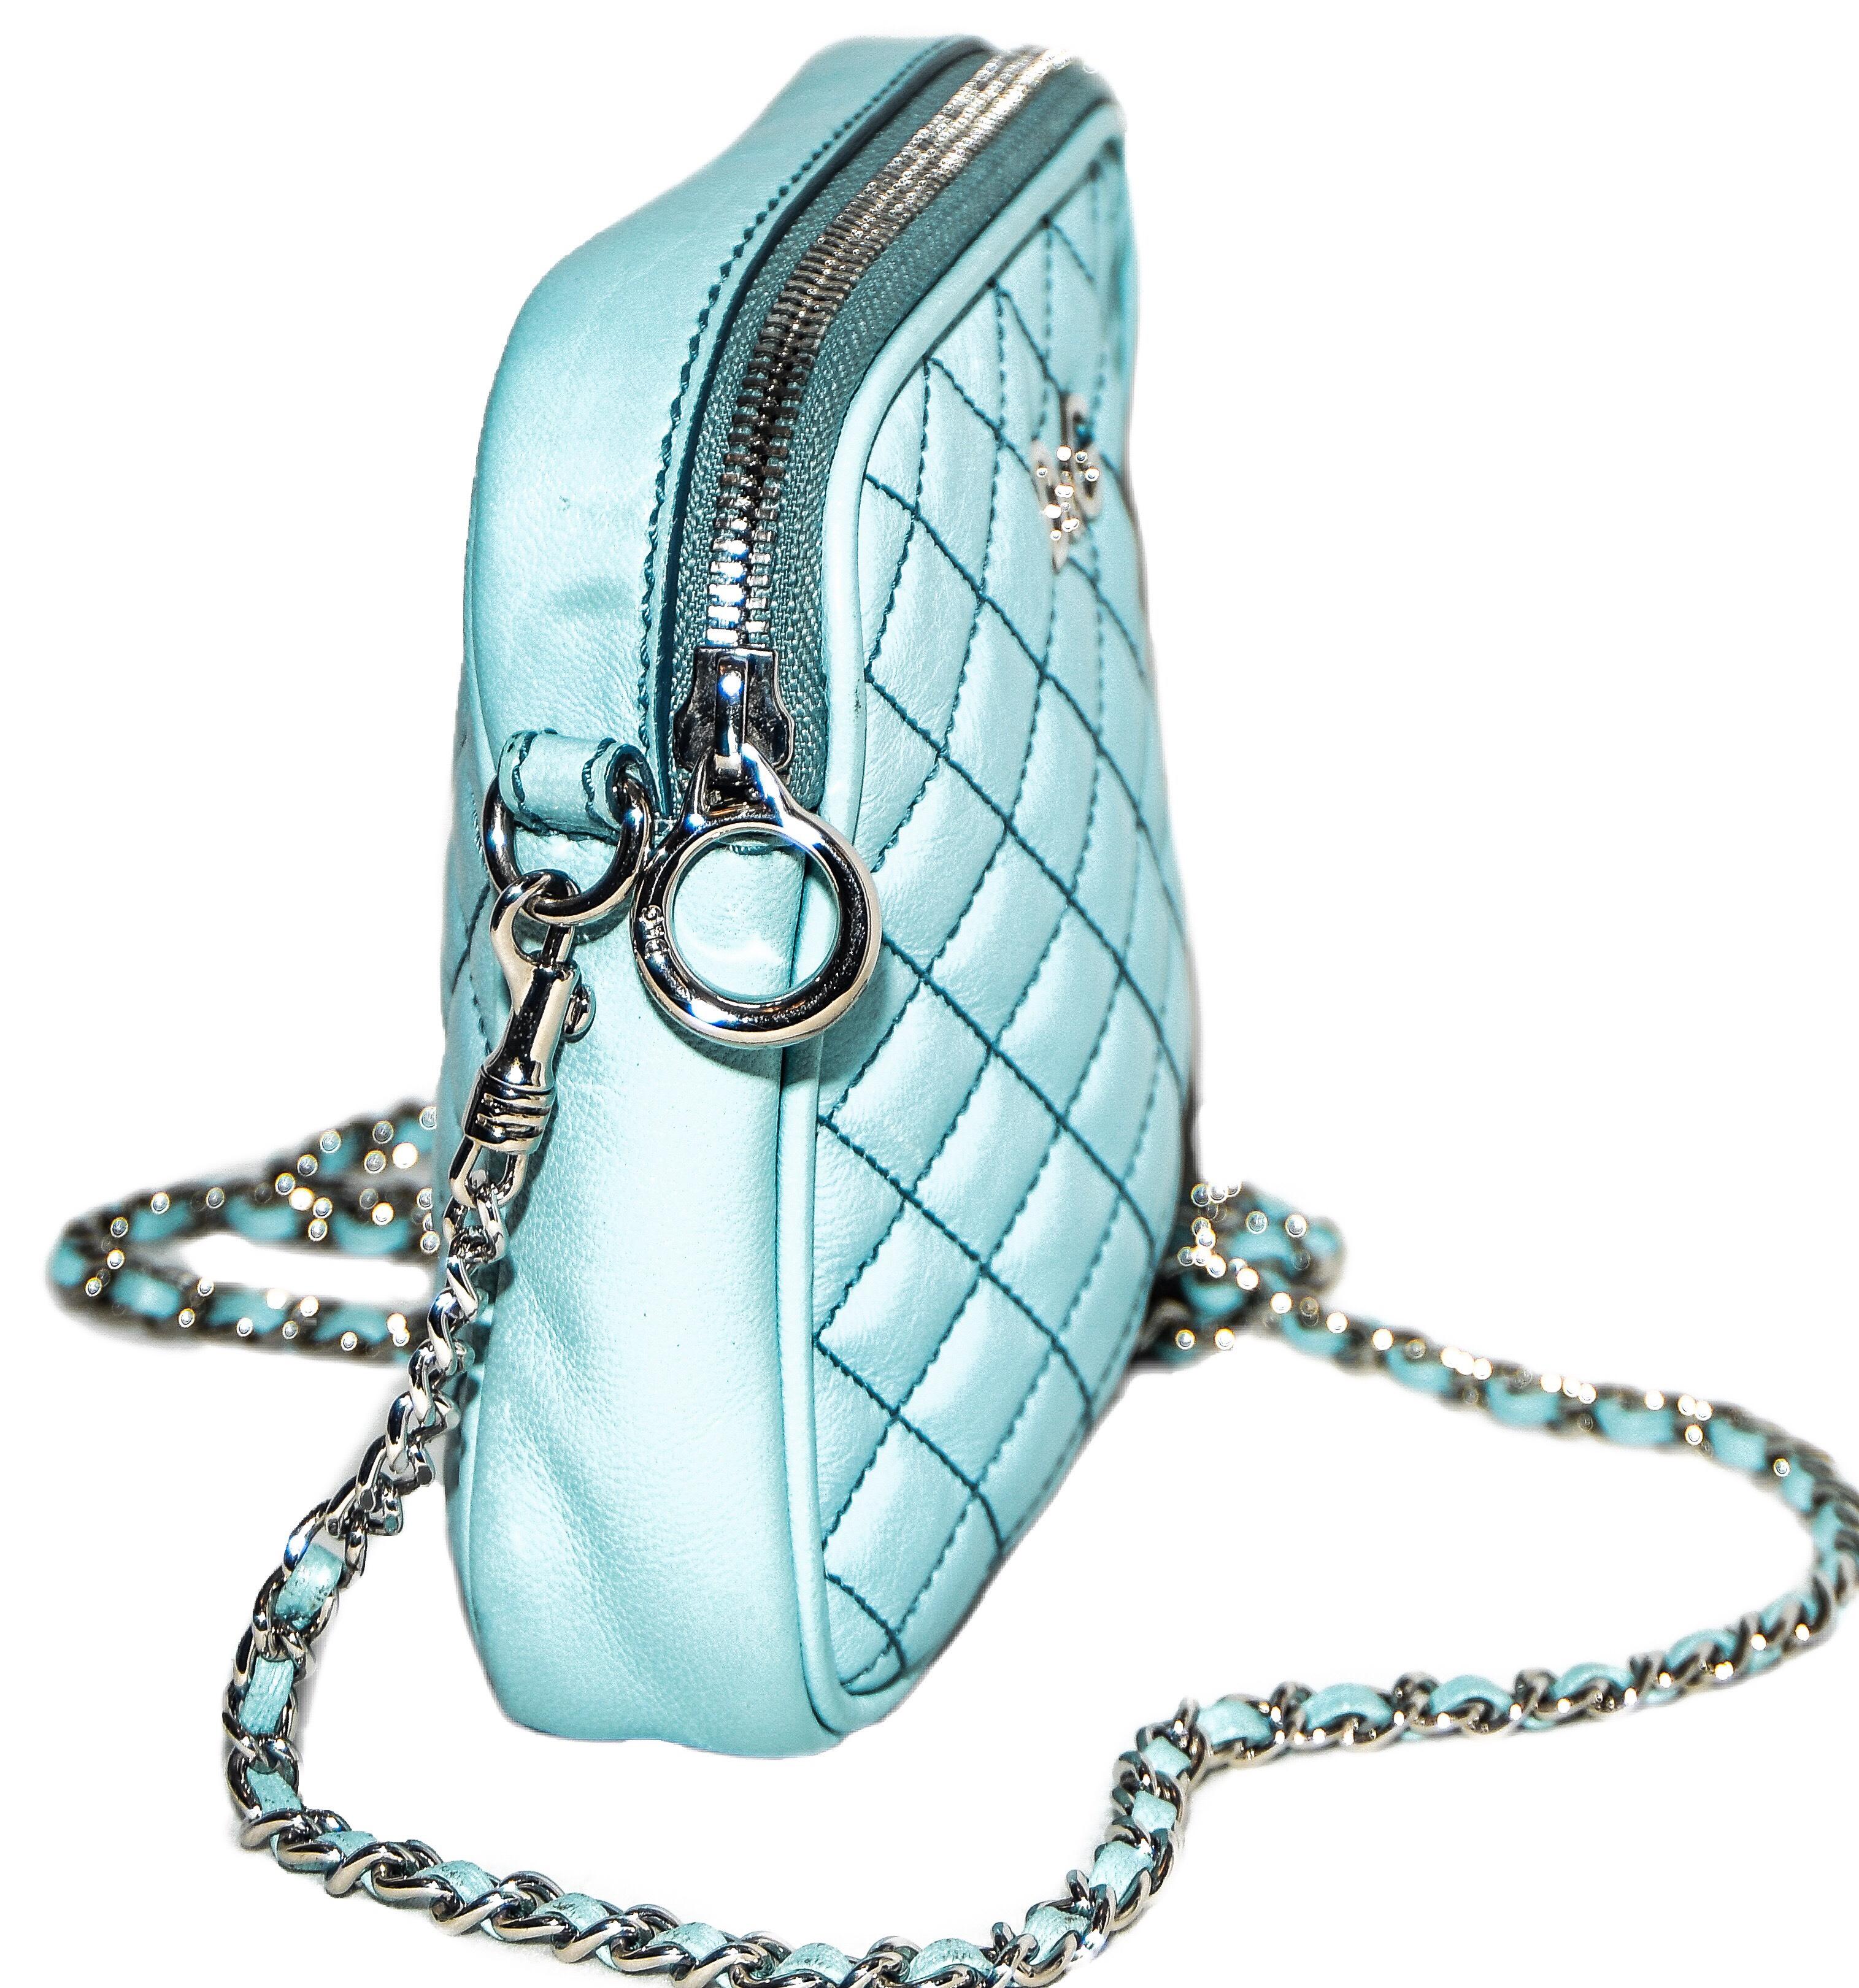 D & G turquoise Lily Glam quilted cross body bag is the perfect size to fit your essentials plus your smart phone.  This quilted cross body with D&G logo at front and removable shoulder strap, so it can be worn as a clutch.  Top zipper for closure